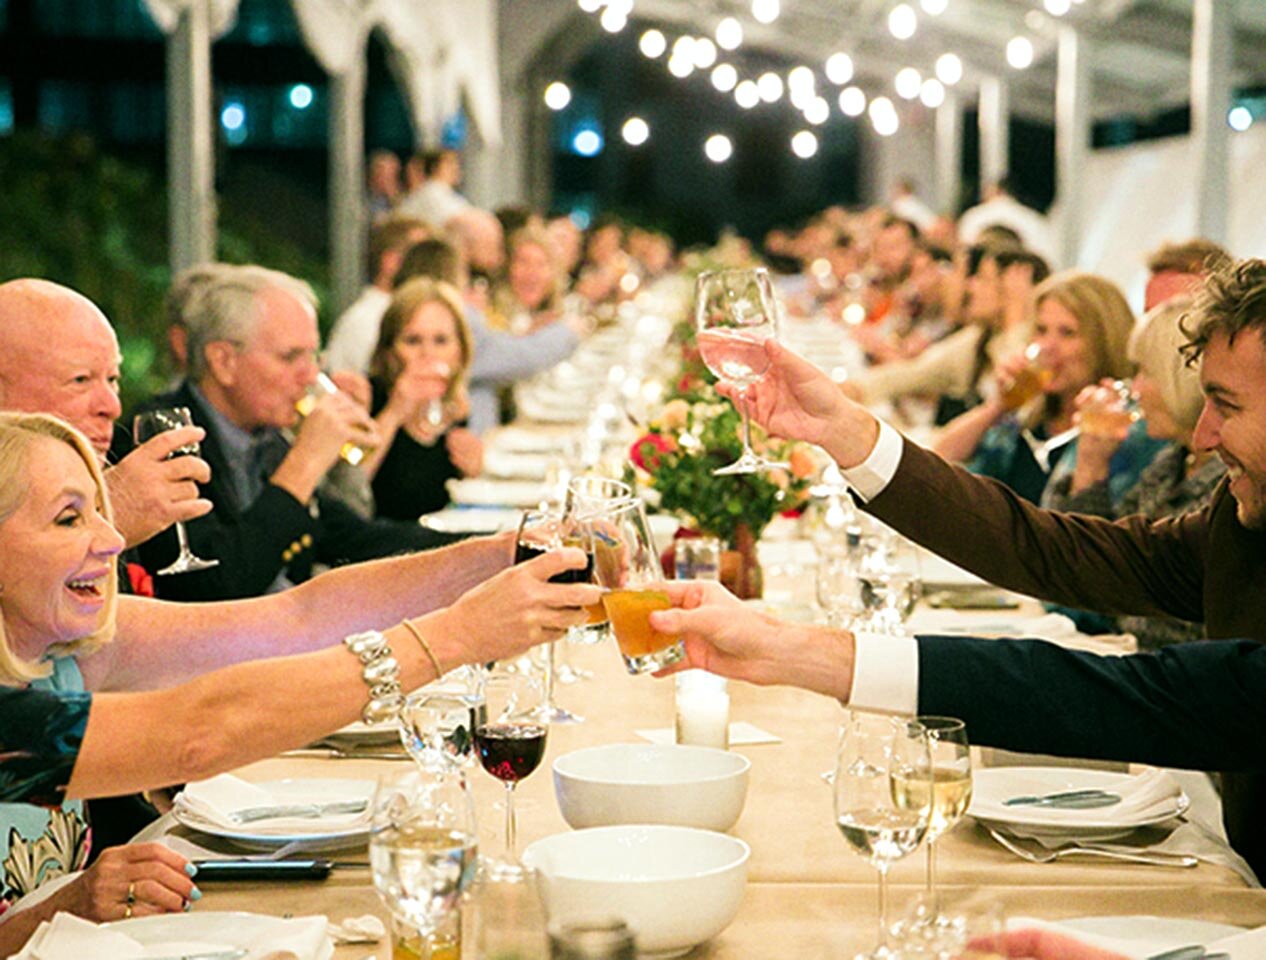 Wedding guests raise their glasses for a toast at the Brooklyn Grange.